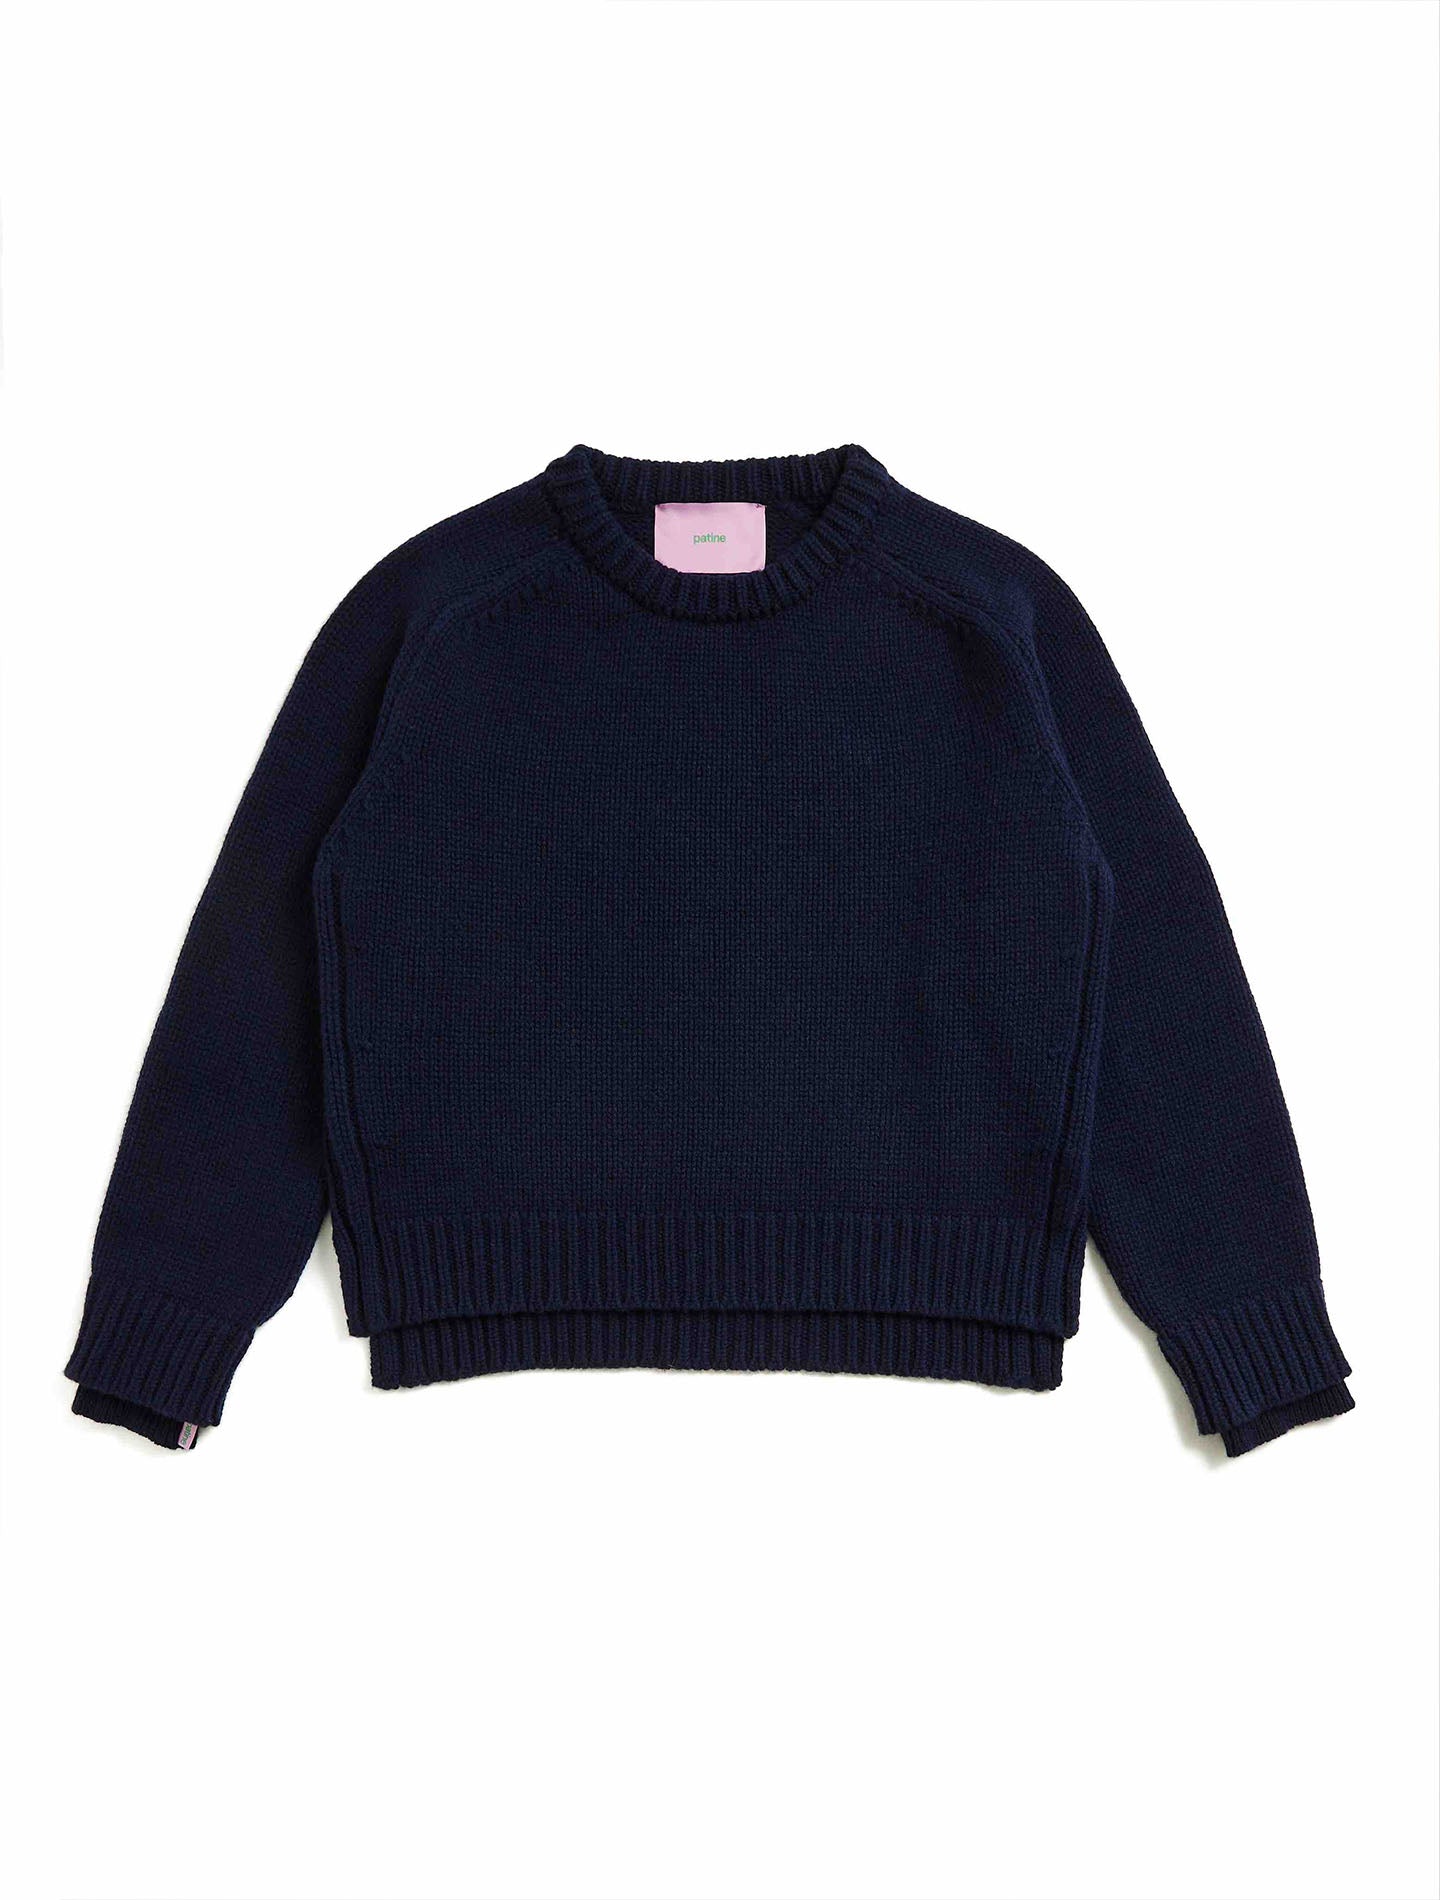 Le pull Wooly laine 100% recyclée Bleu marine